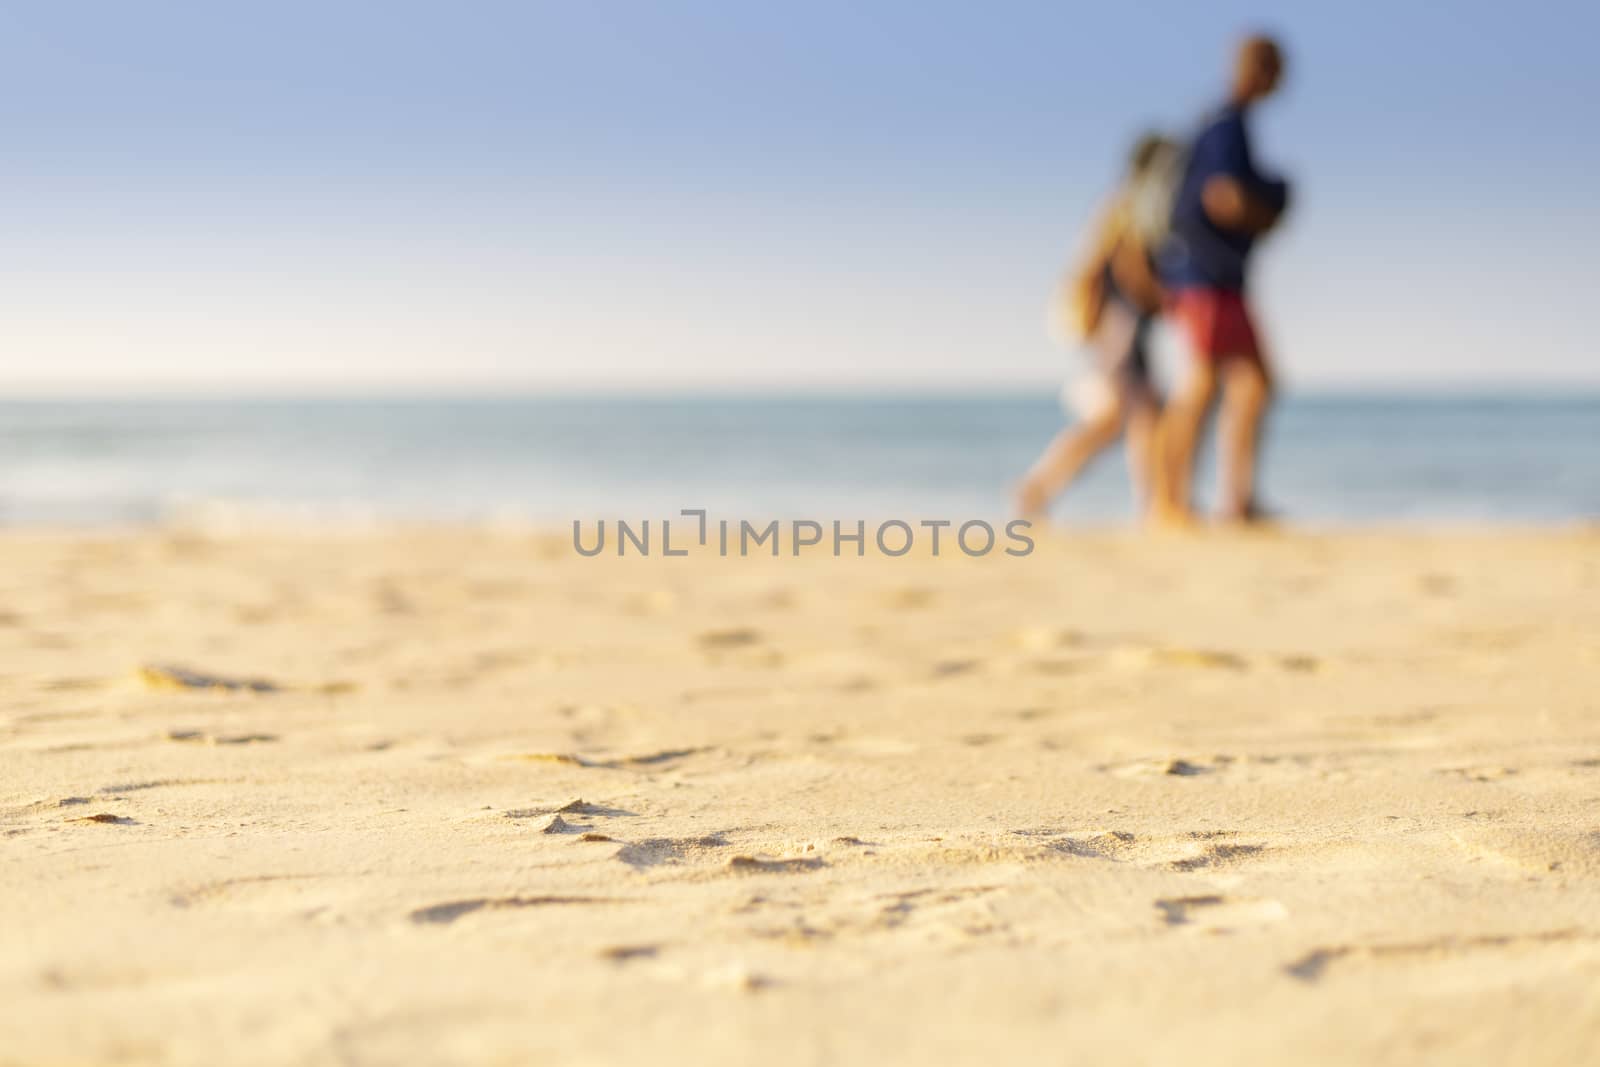 Holiday concept. Clear sand with blur guy, sea and clear sky background. Soft focus and focus selective sand.